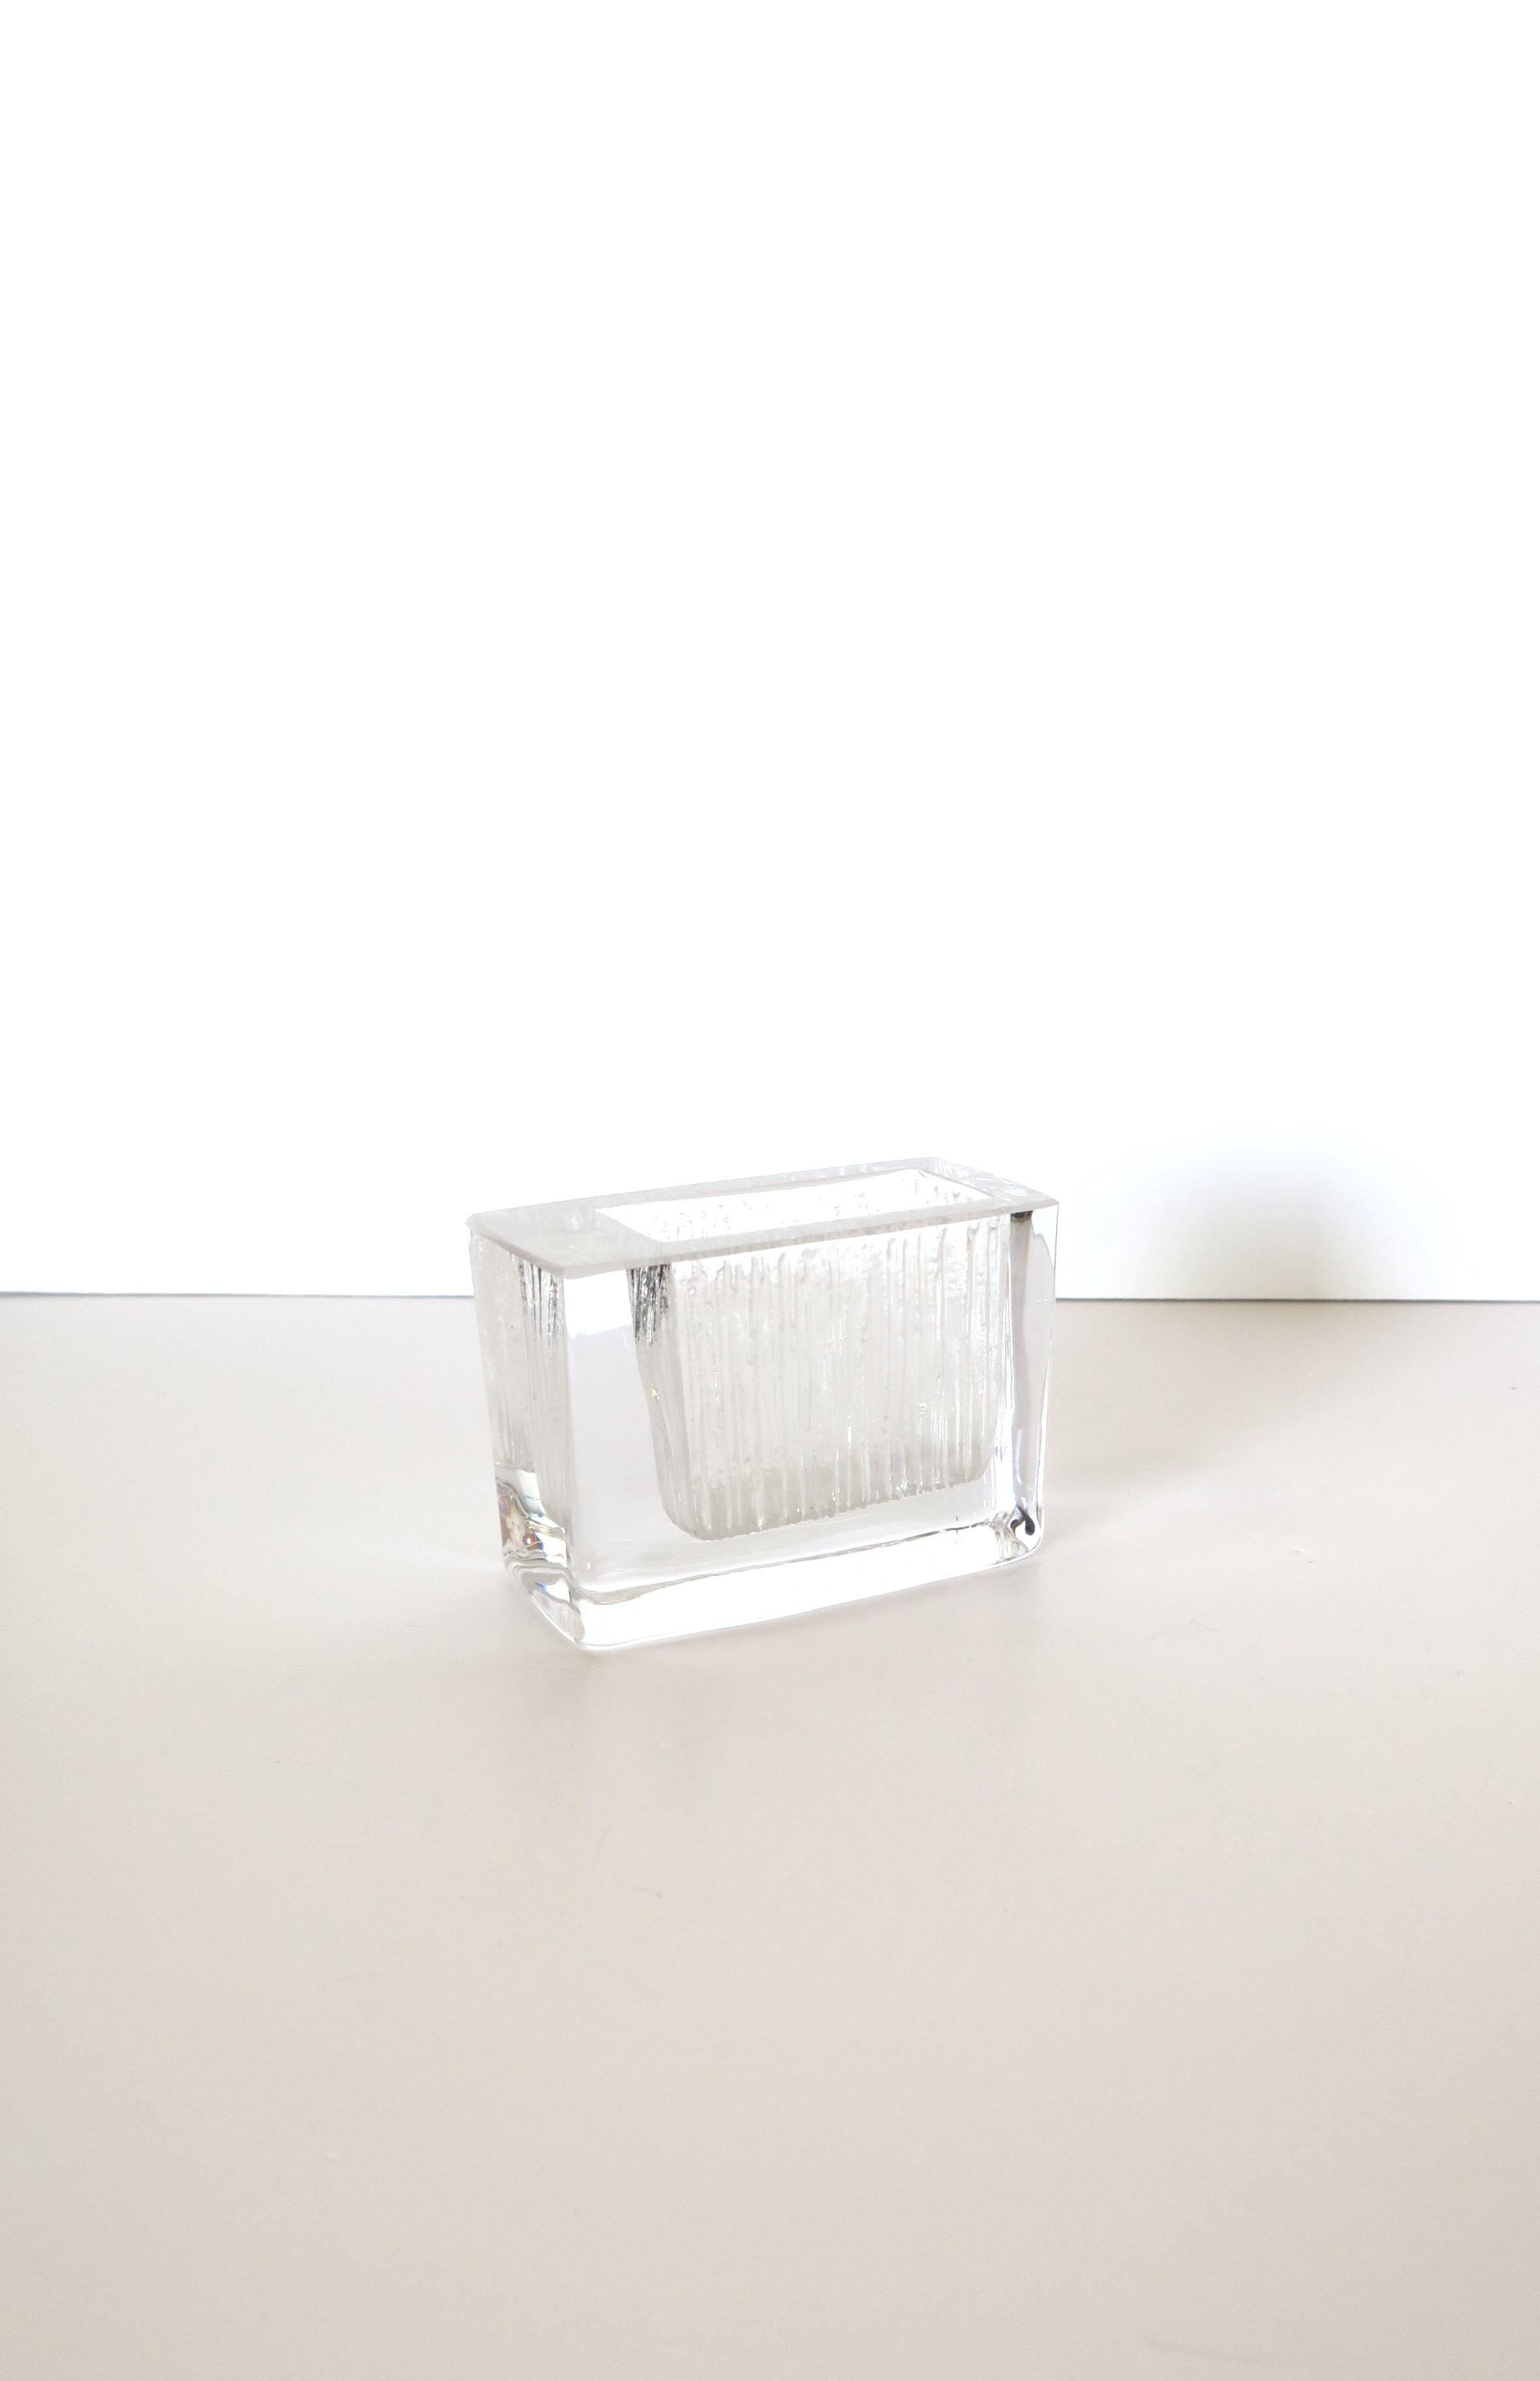 A beautiful, small, and substantial French crystal vase from luxury Maison, Daum, in the modern Minimalist styles, circa 20th century, France. The piece is rectangular in shape with an etched glass design. Beautiful as a standalone piece or with